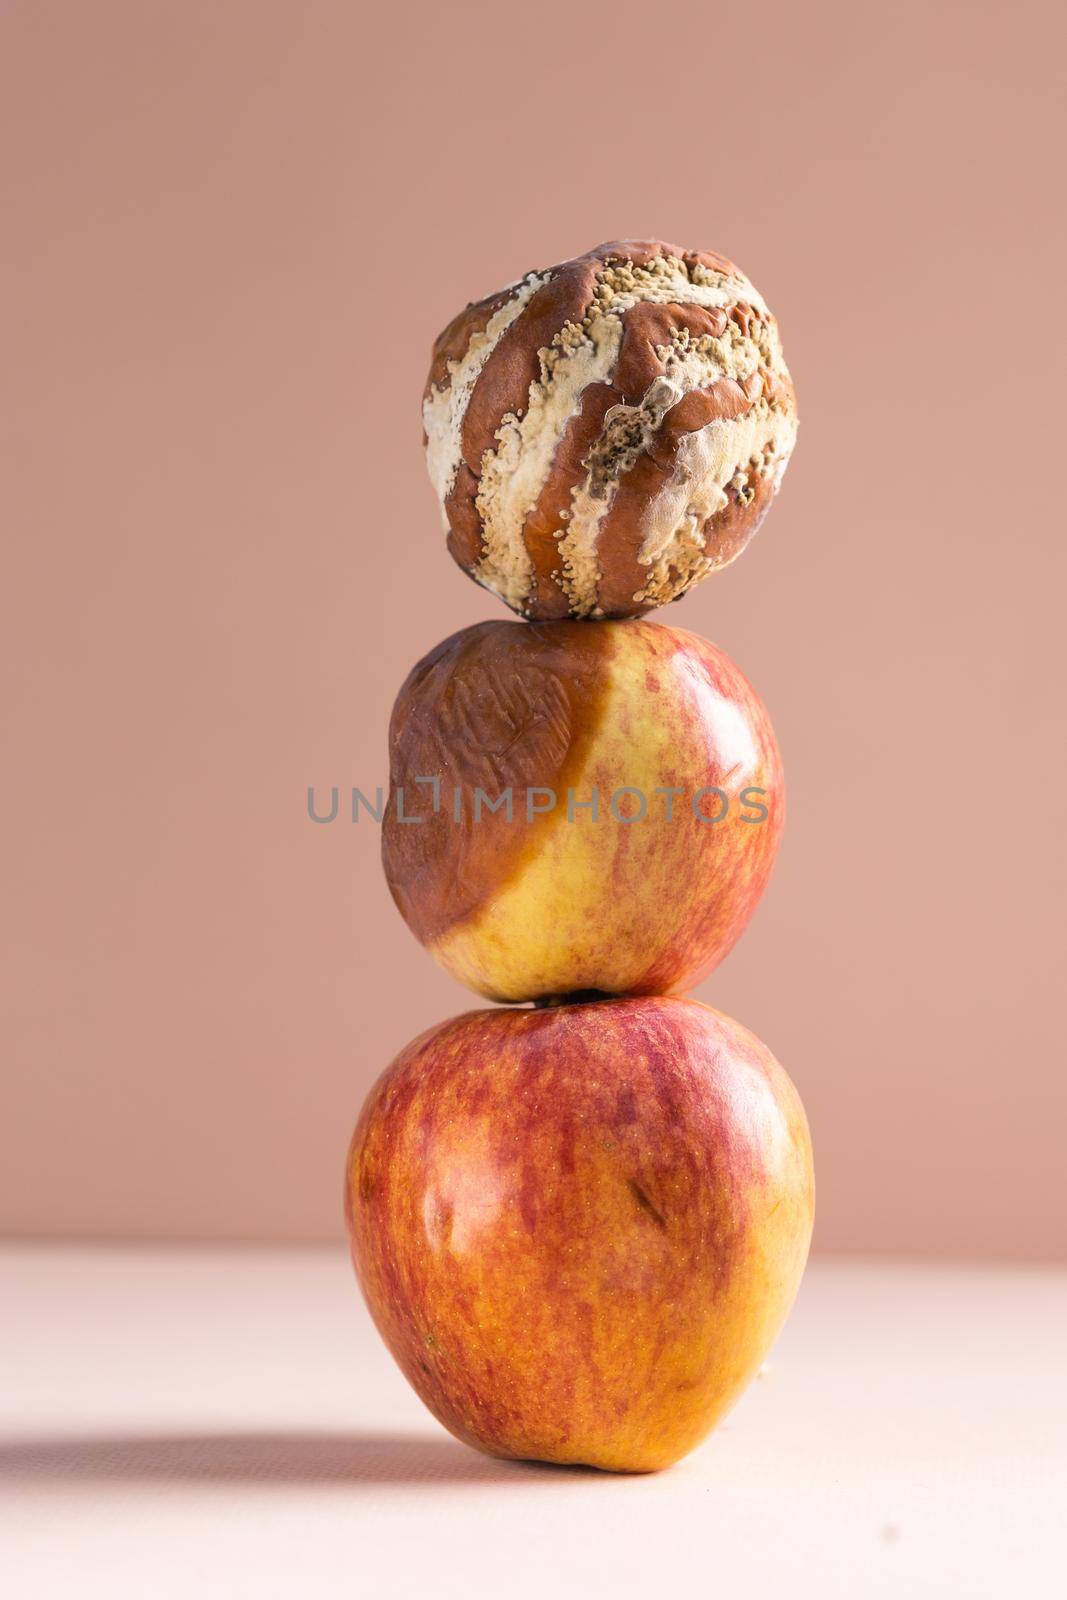 Apple with mold and fresh apple on beige background - mold growth and food spoilage concept. Copy space and place for advertising. High quality photo